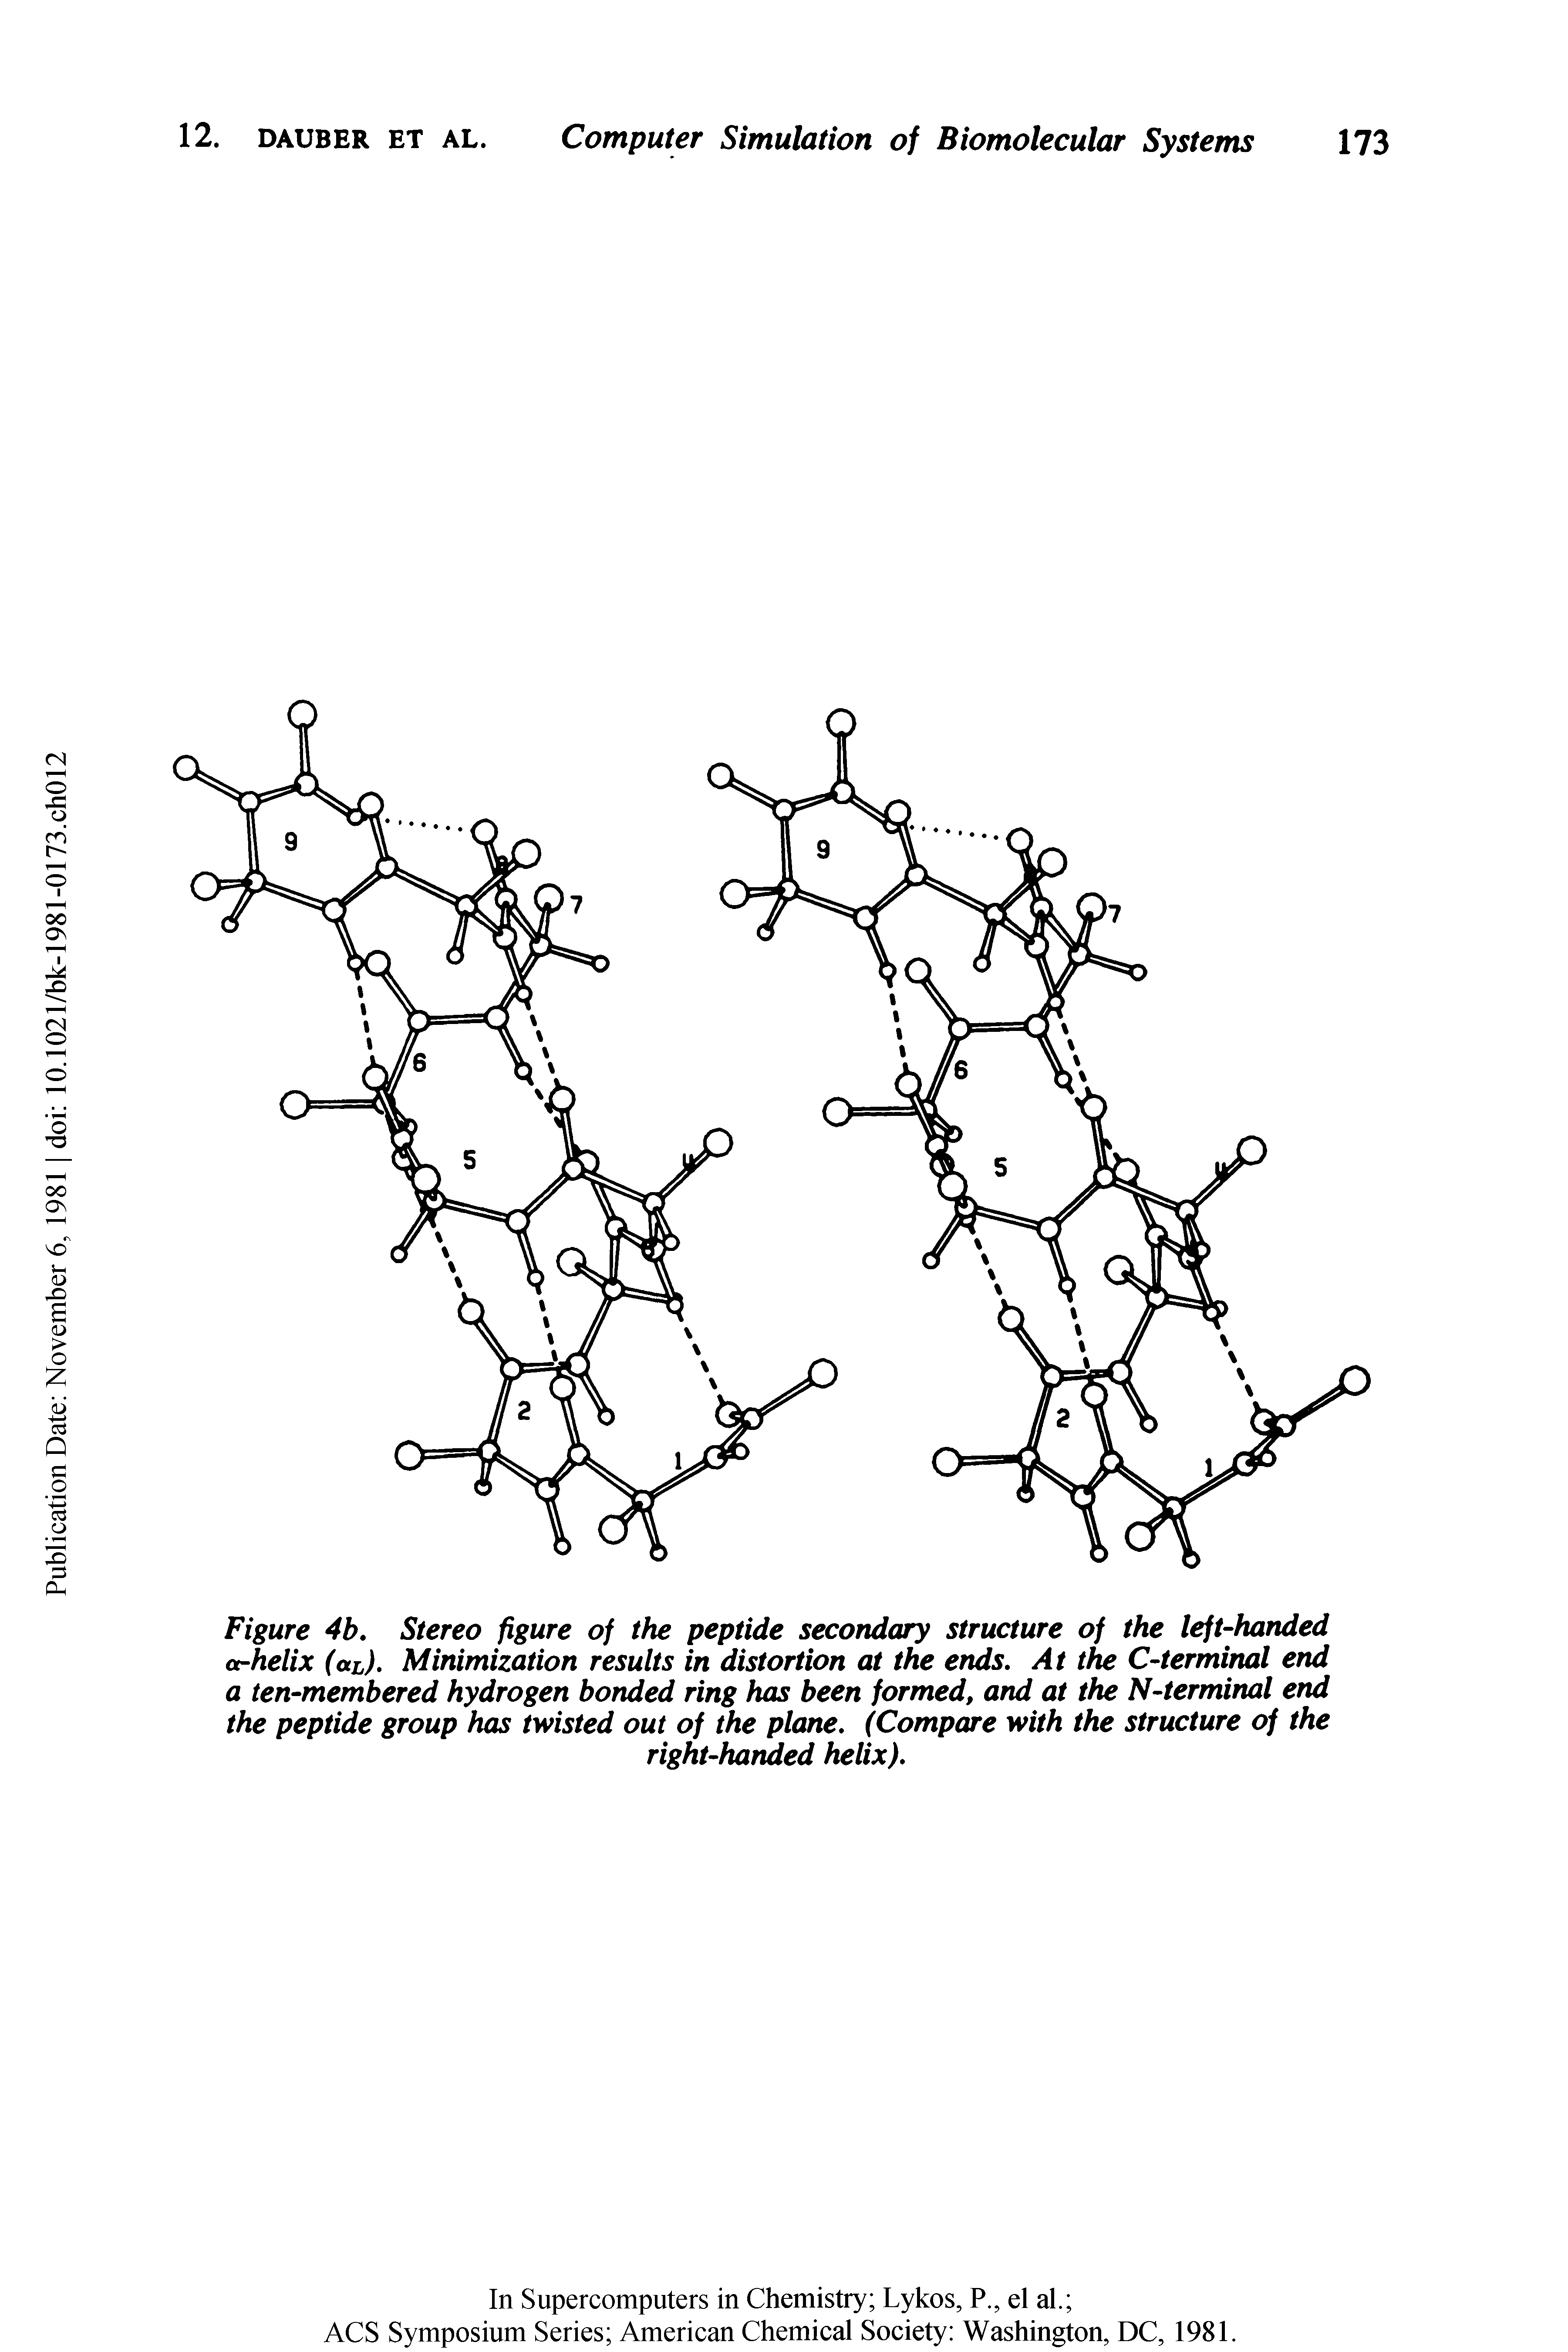 Figure 4b. Stereo figure of the peptide secondary structure of the left-handed arhelix (aL). Minimization results in distortion at the ends. At the C-terminal end a ten-membered hydrogen bonded ring has been formed, and at the N-terminal end the peptide group has twisted out of the plane. (Compare with the structure of the...